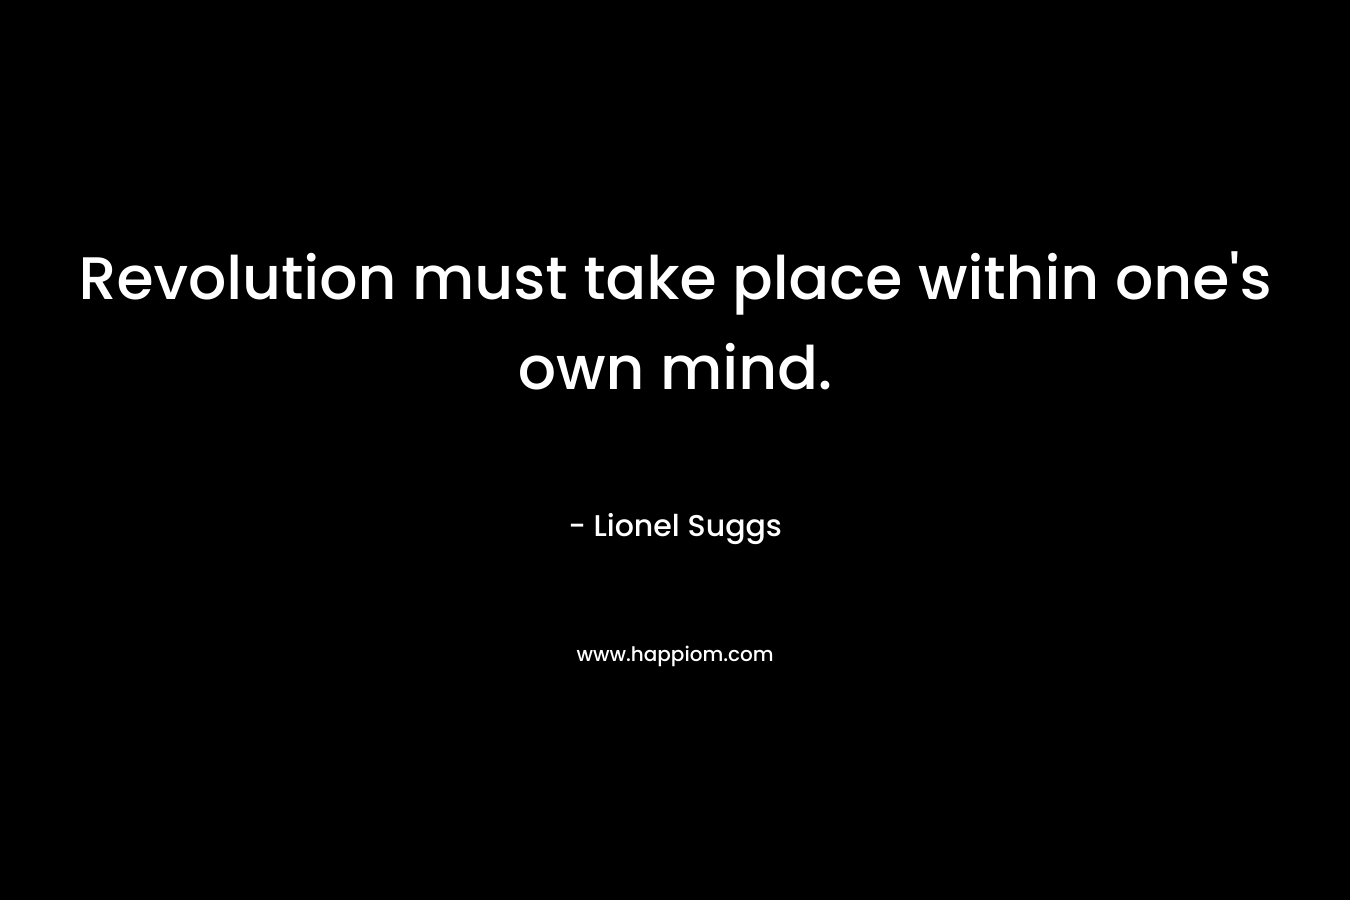 Revolution must take place within one’s own mind. – Lionel Suggs